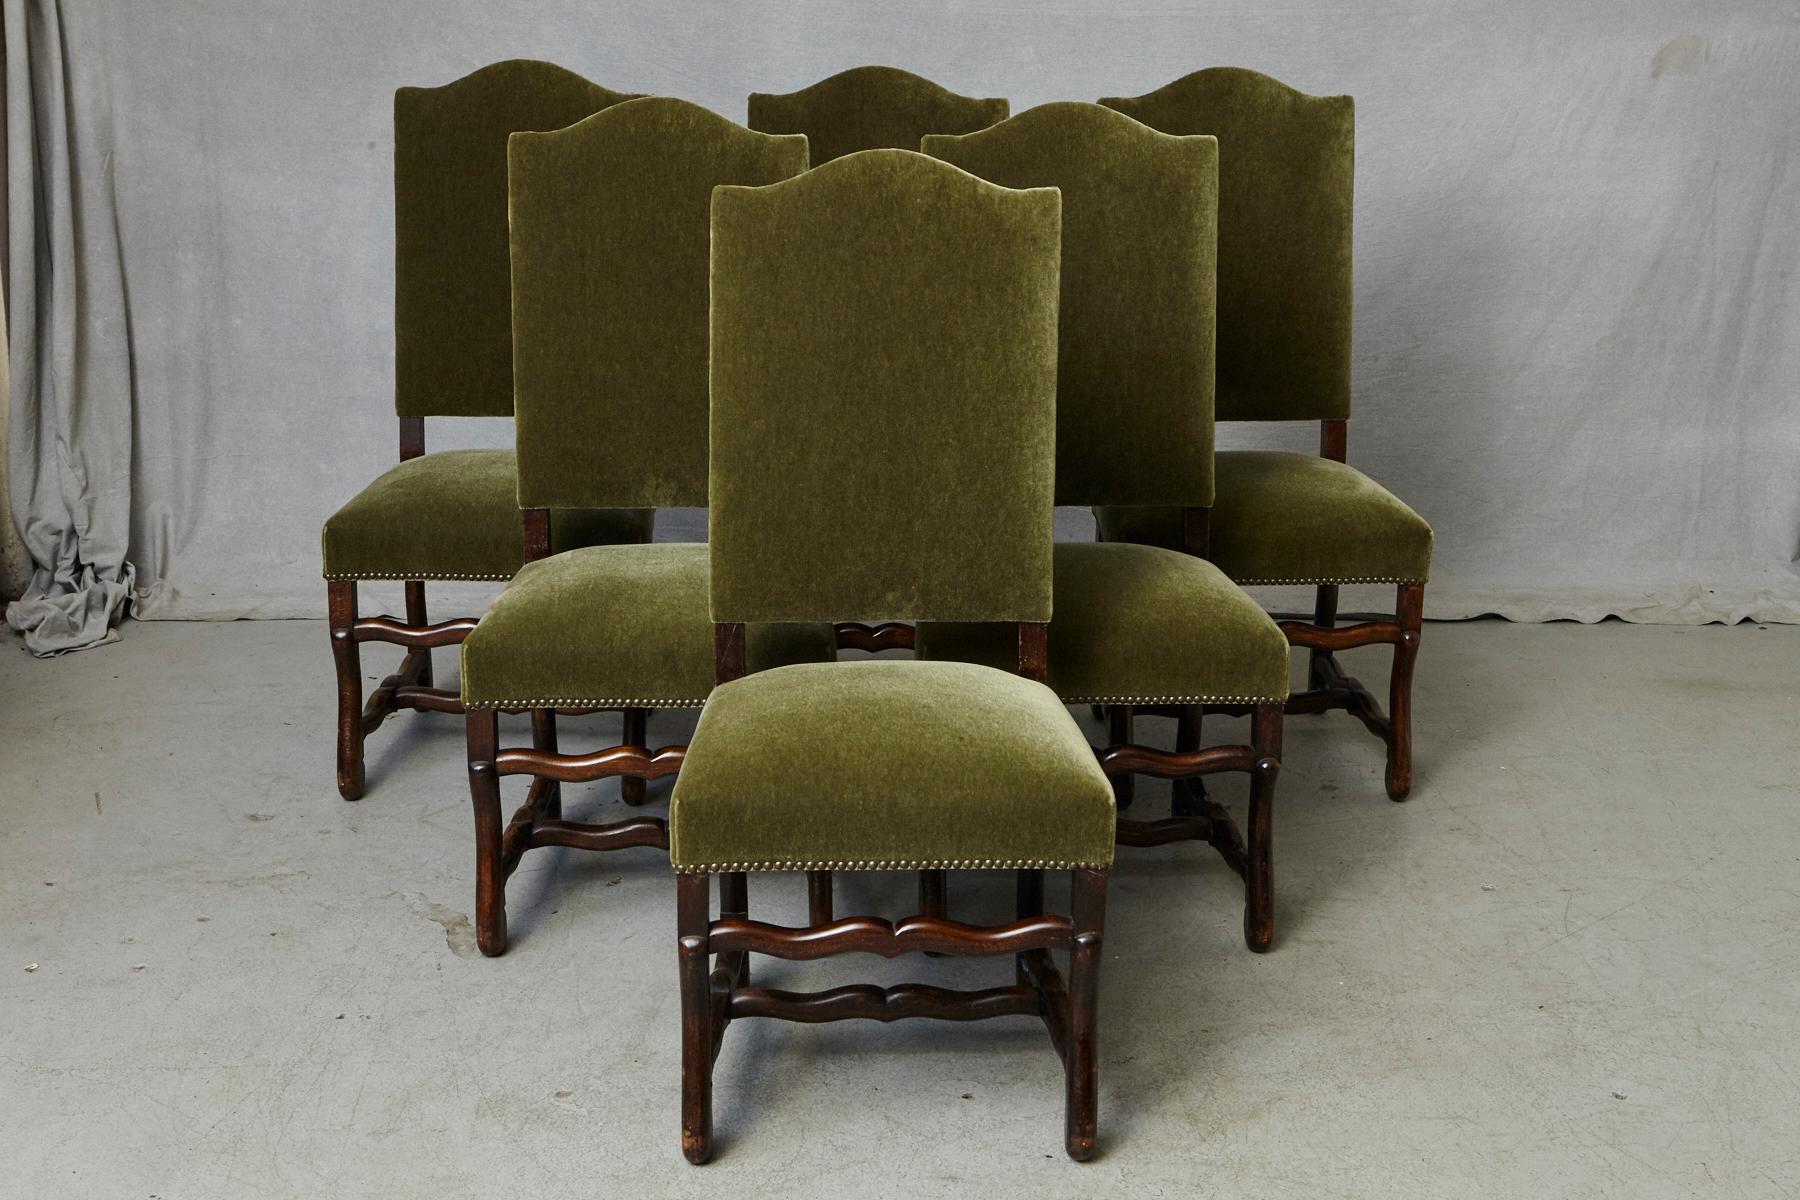 Elegant set of six French Louis XIV style Os de Mouton walnut high back dining chairs with chapeau de gendarme cresting, nailhead trim and H-shaped stretchers, upholstered in green mohair, circa 1900s.
The chairs are in excellent condition, very